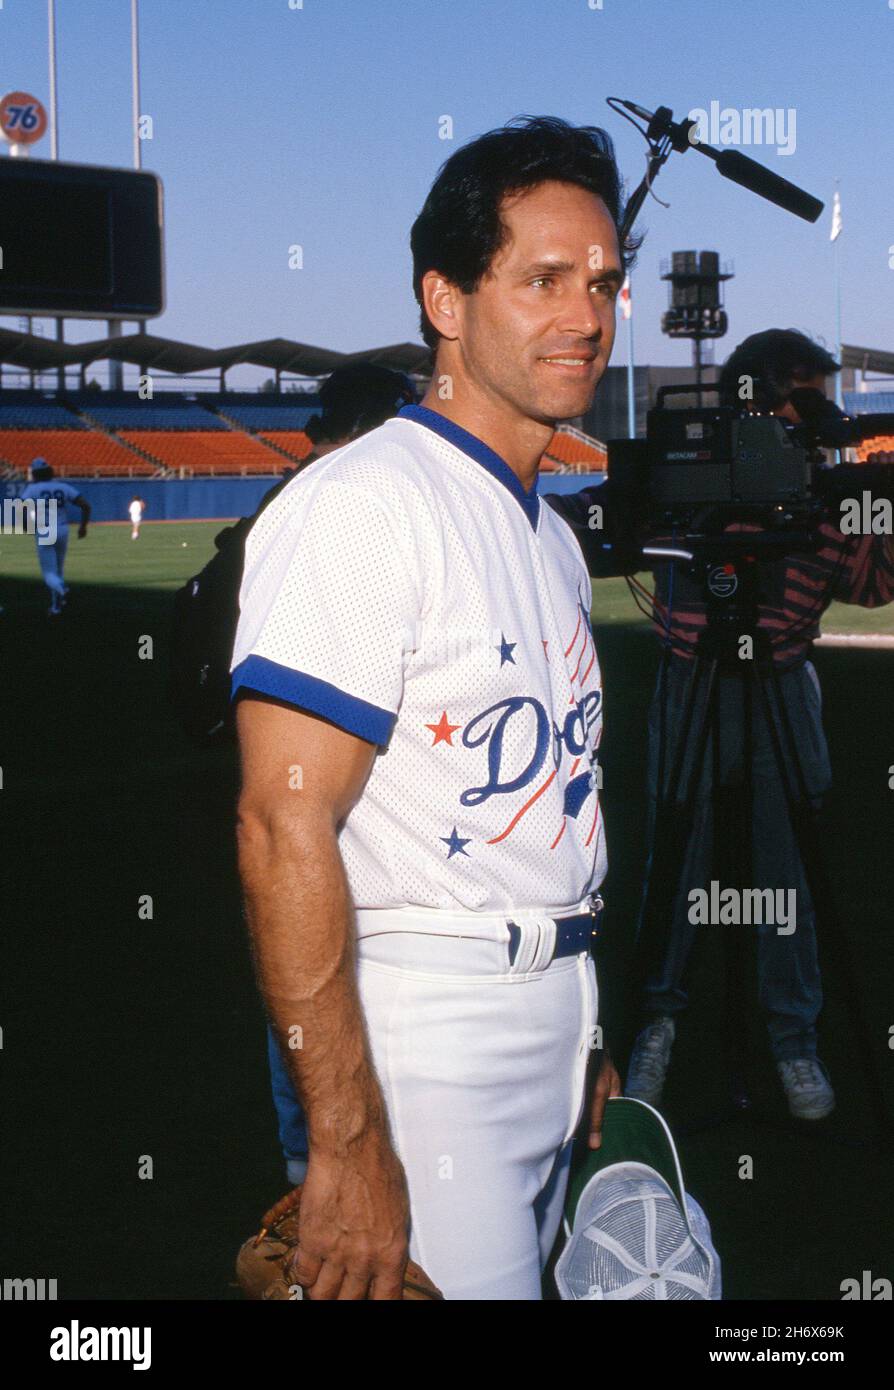 Gregory Harrison at the 31st Annual 'Hollywood Stars Night' Celebrity Baseball Game on August 26, 1989 at Dodger Stadium in Los Angeles, California.Credit: Ralph Dominguez/MediaPunch Stock Photo